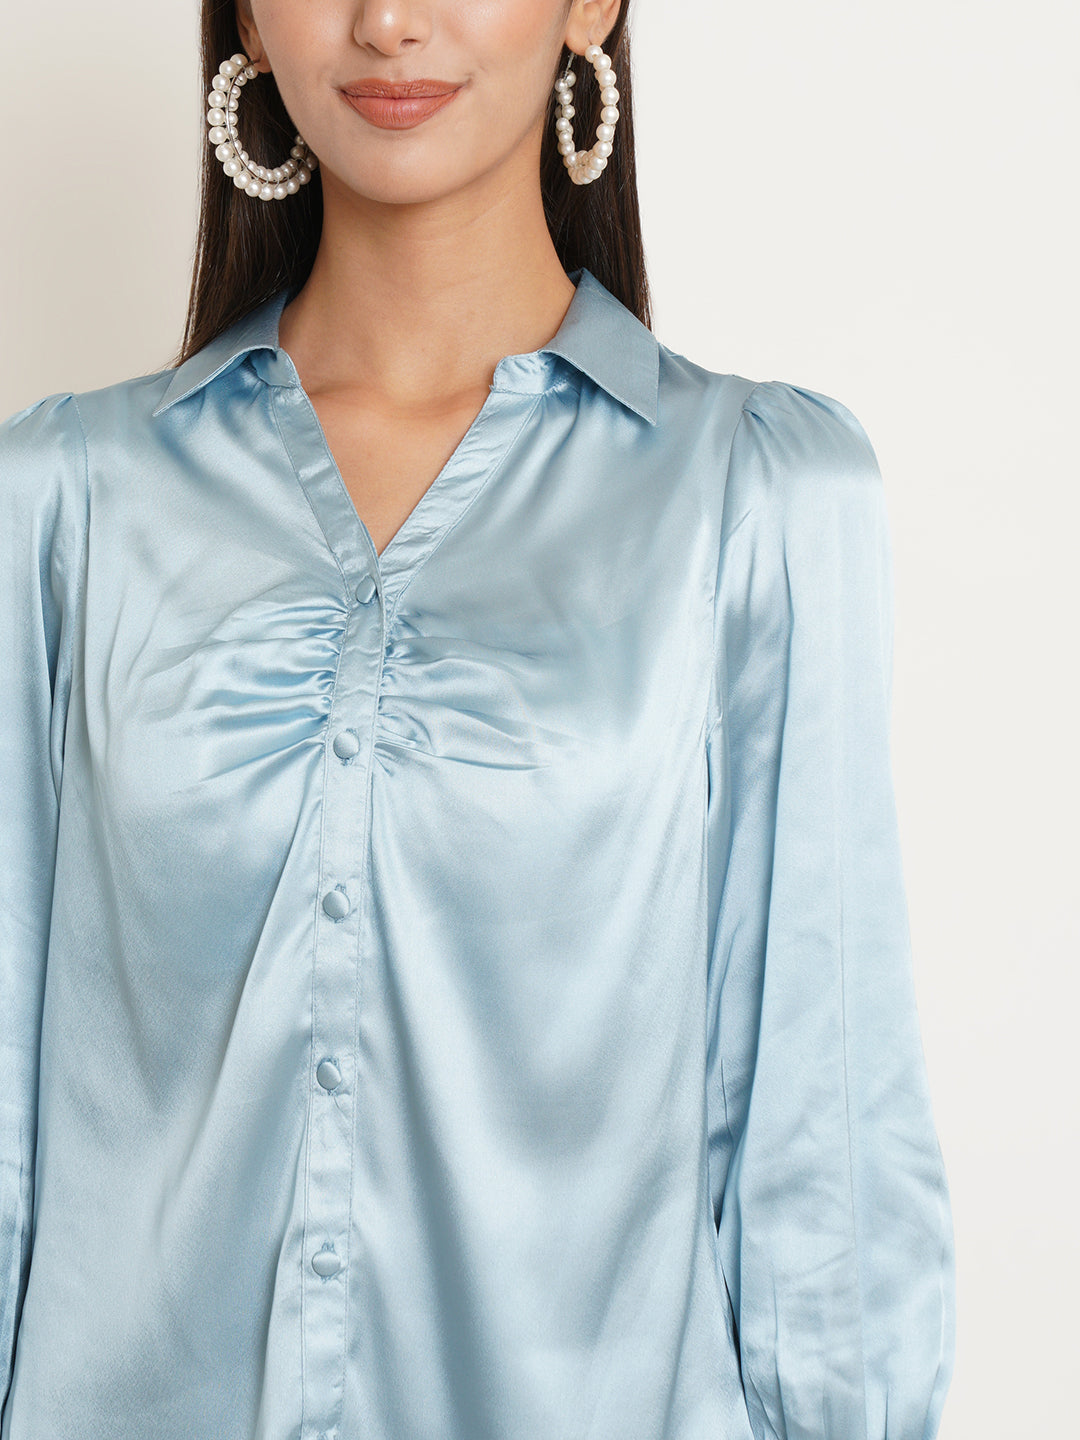 Women Silver Solid Satin Full Sleeves Shirt Collared Tops